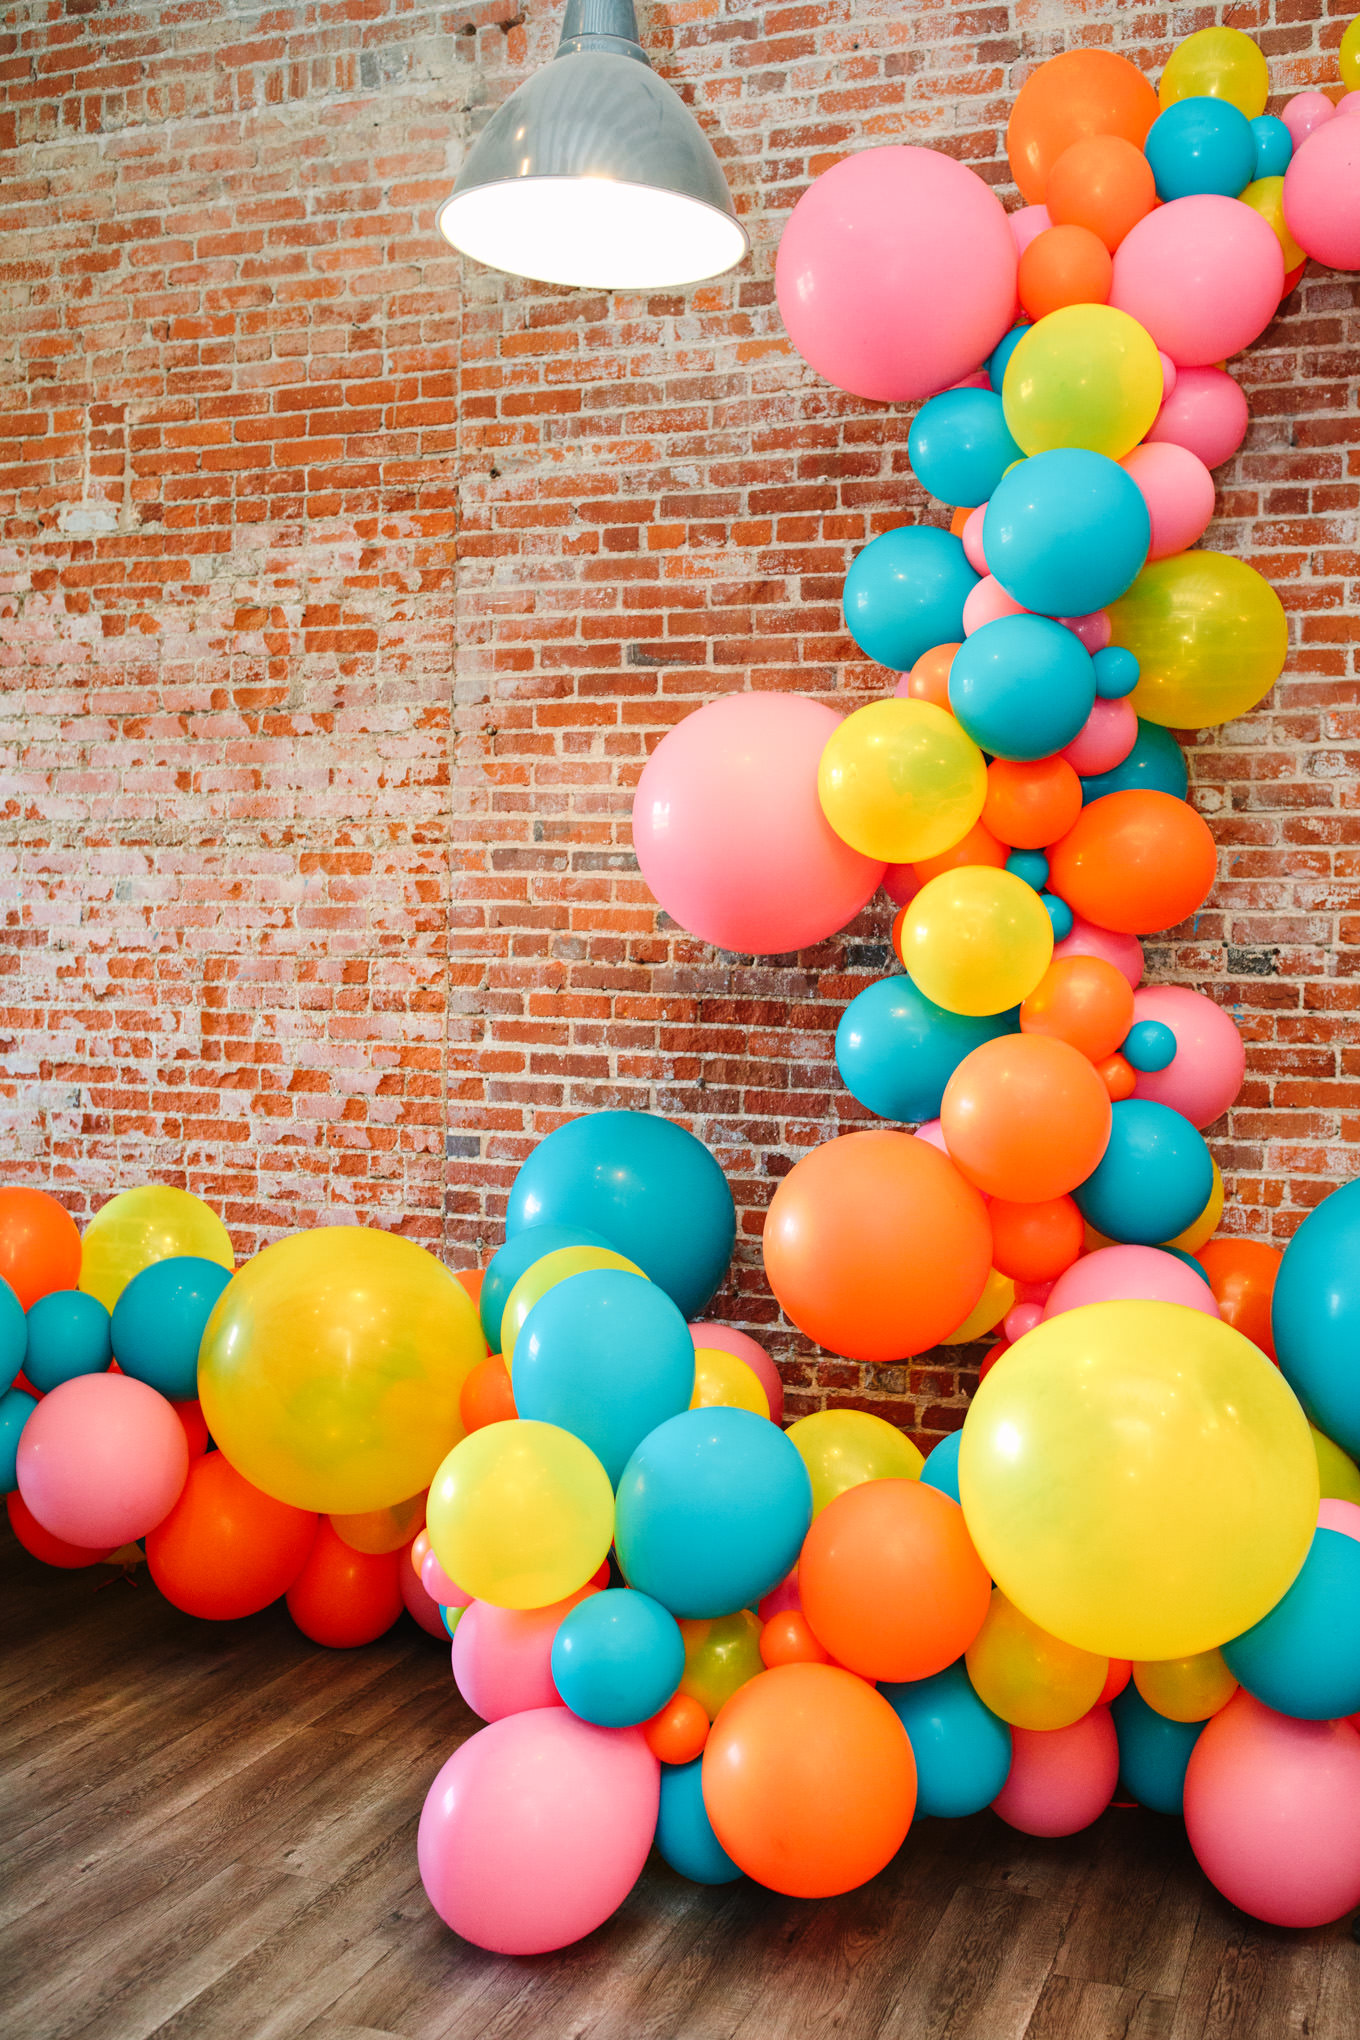 Balloon install at Unique Space | Colorful wedding at The Unique Space Los Angeles published in The Knot Magazine | Fresh and colorful photography for fun-loving couples in Southern California | #colorfulwedding #losangeleswedding #weddingphotography #uniquespace Source: Mary Costa Photography | Los Angeles